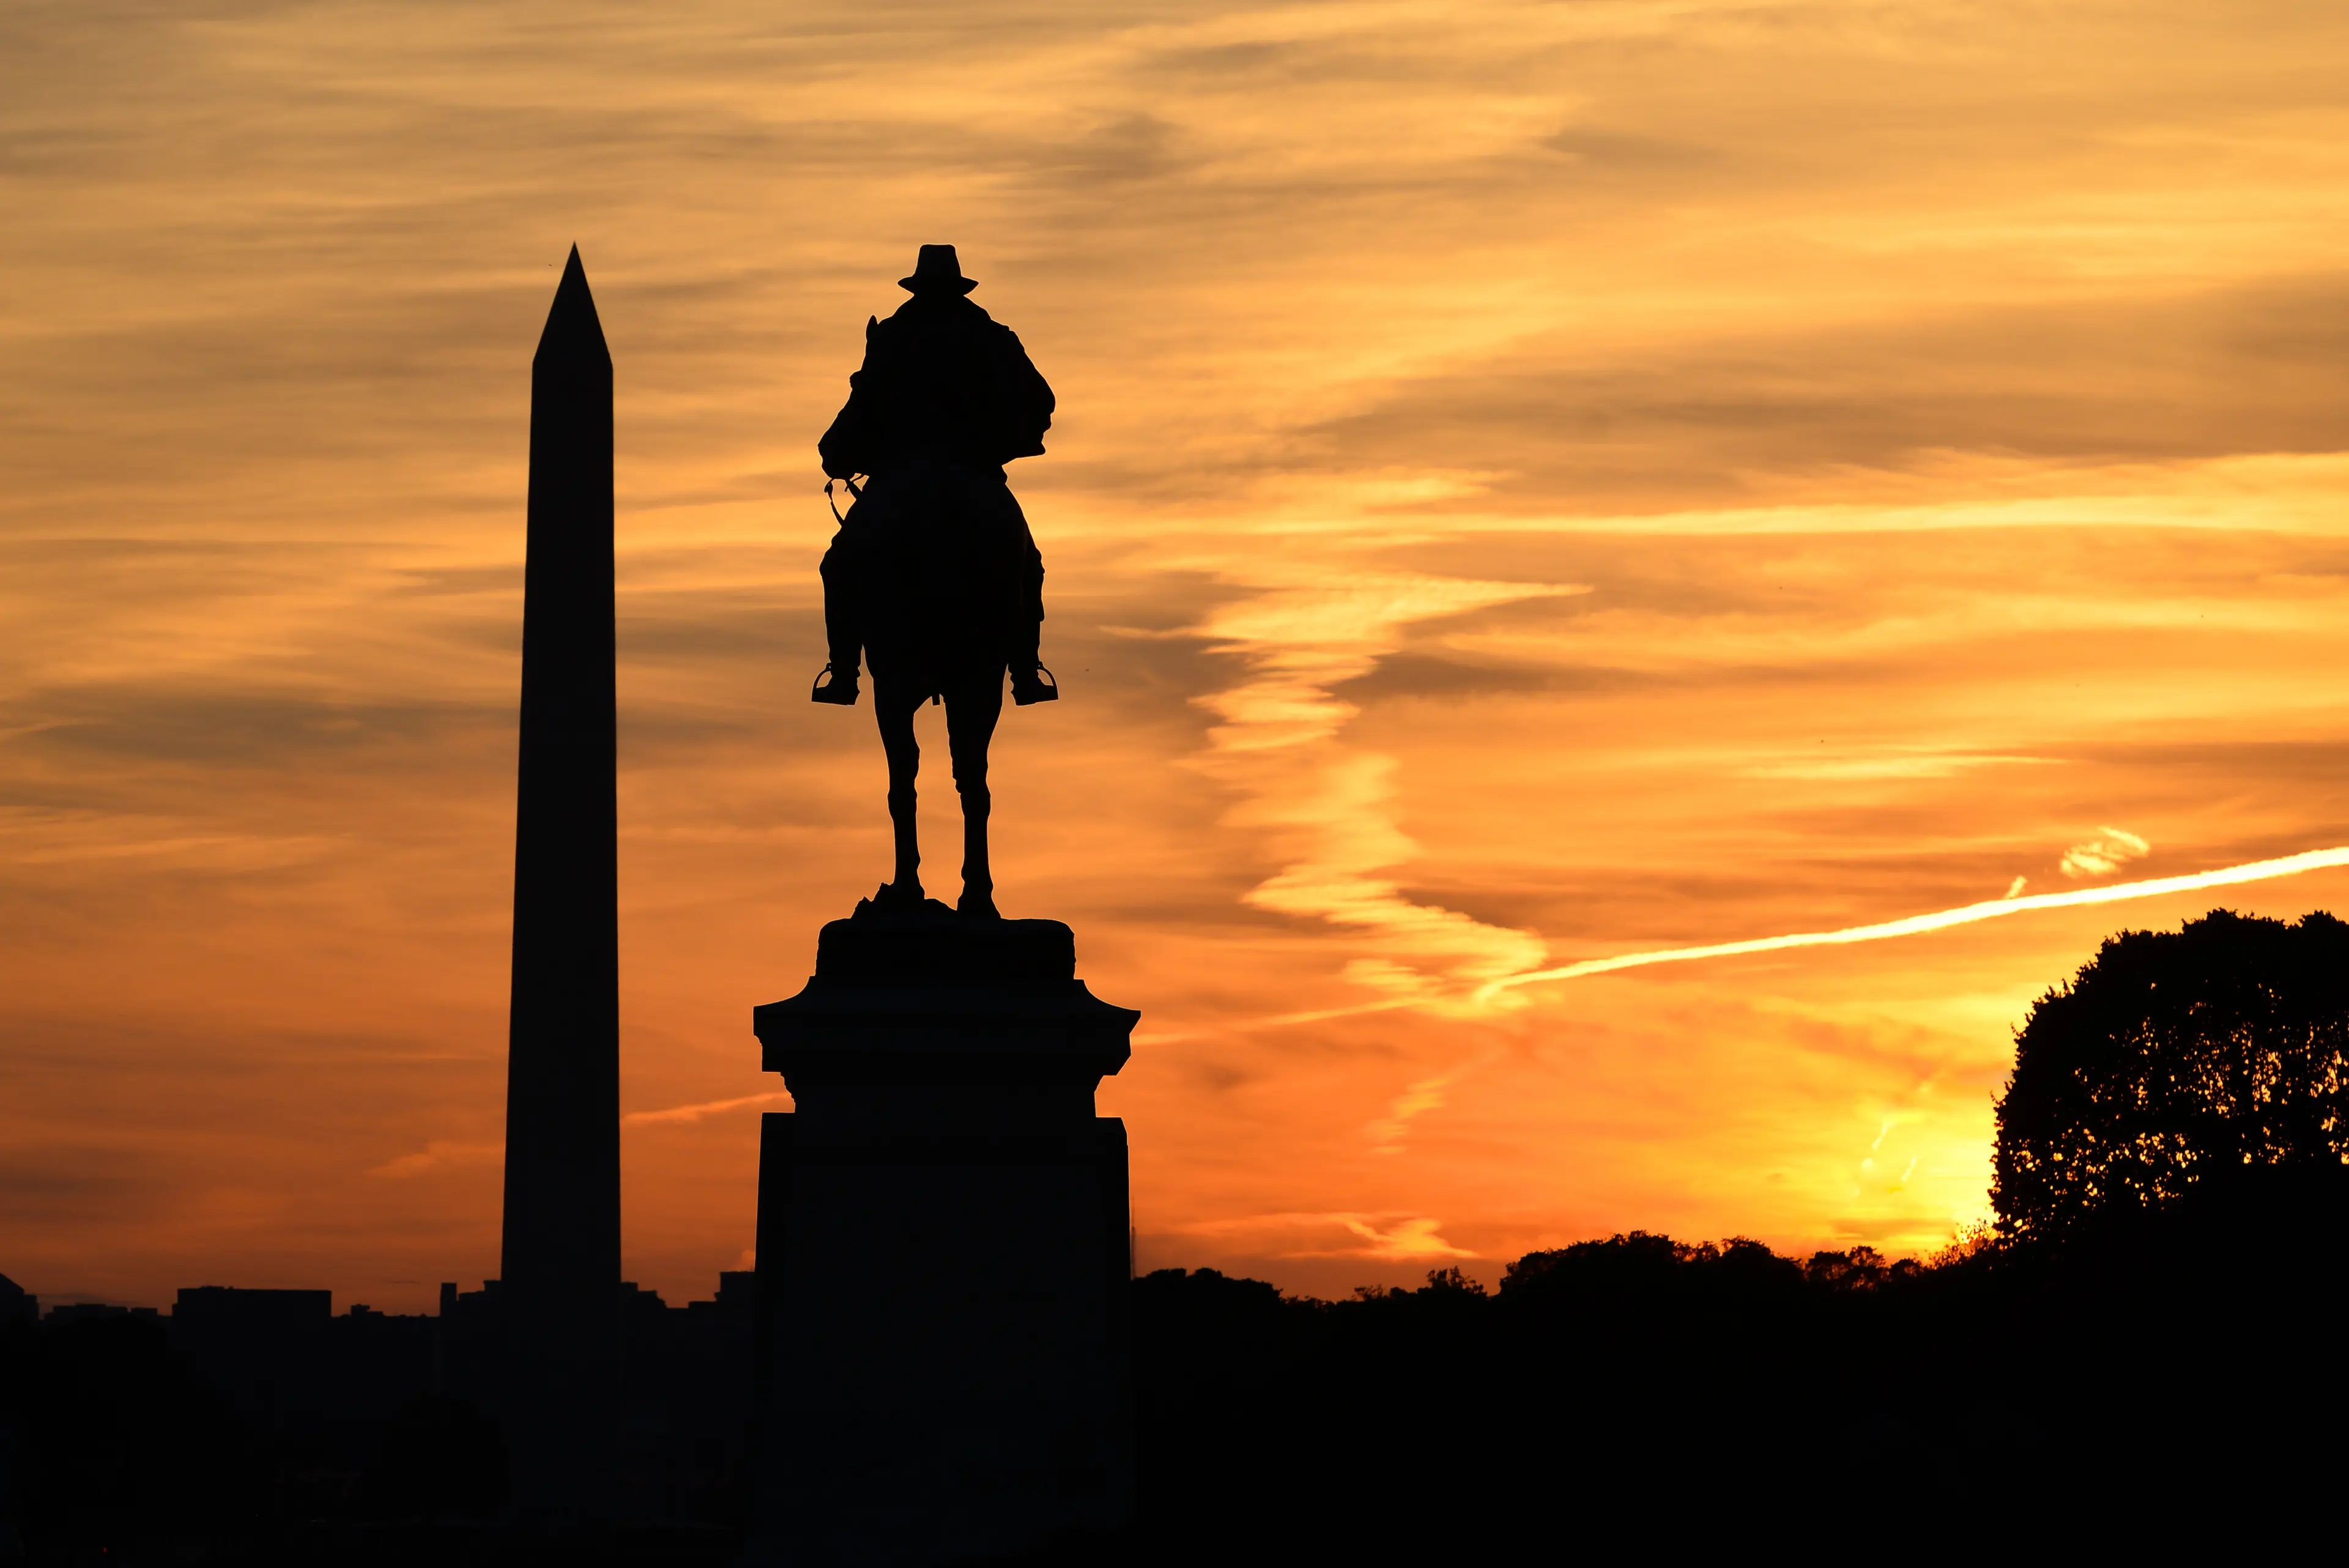 2-Day Solo Relaxation & Culinary Journey in Hidden Washington DC